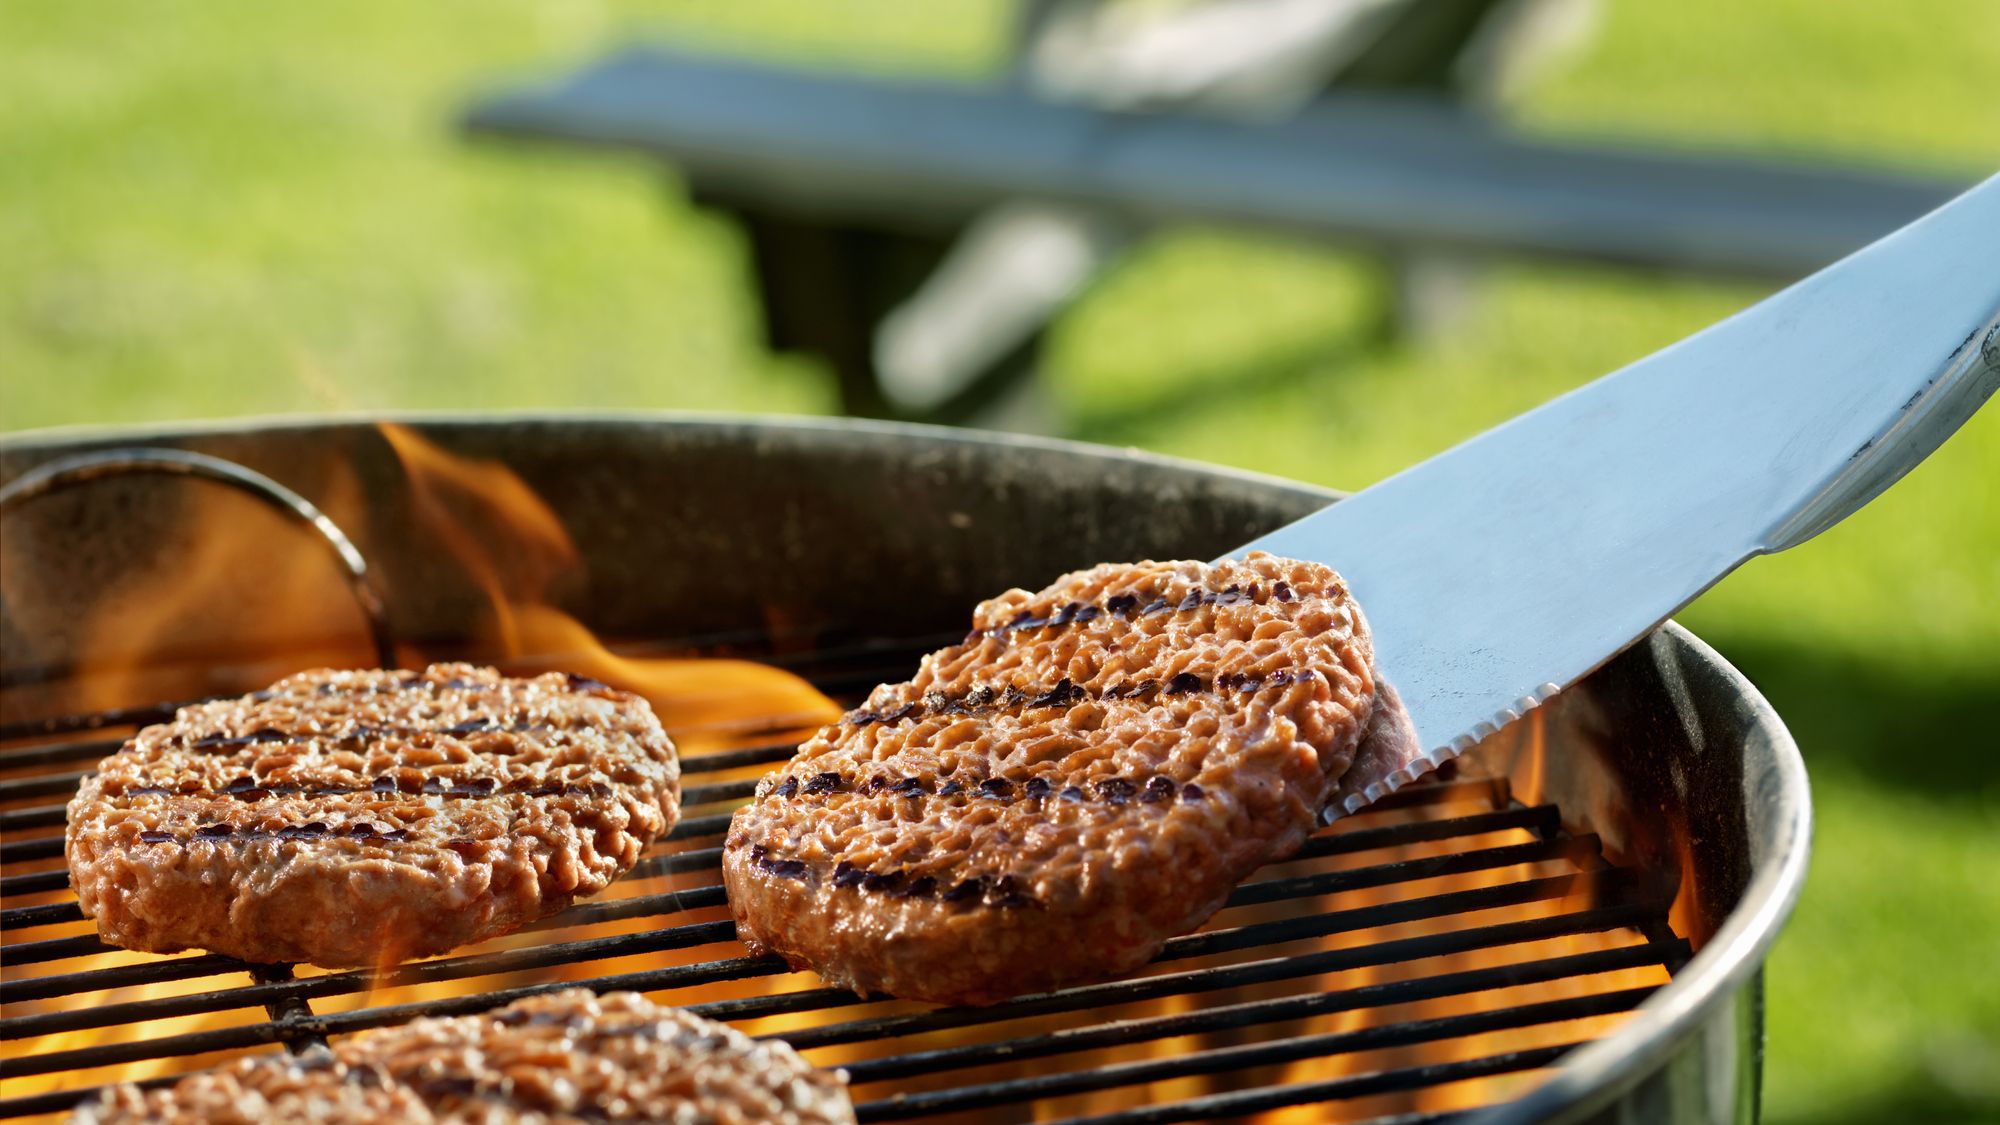 Grill Burgers in 3 Easy Steps